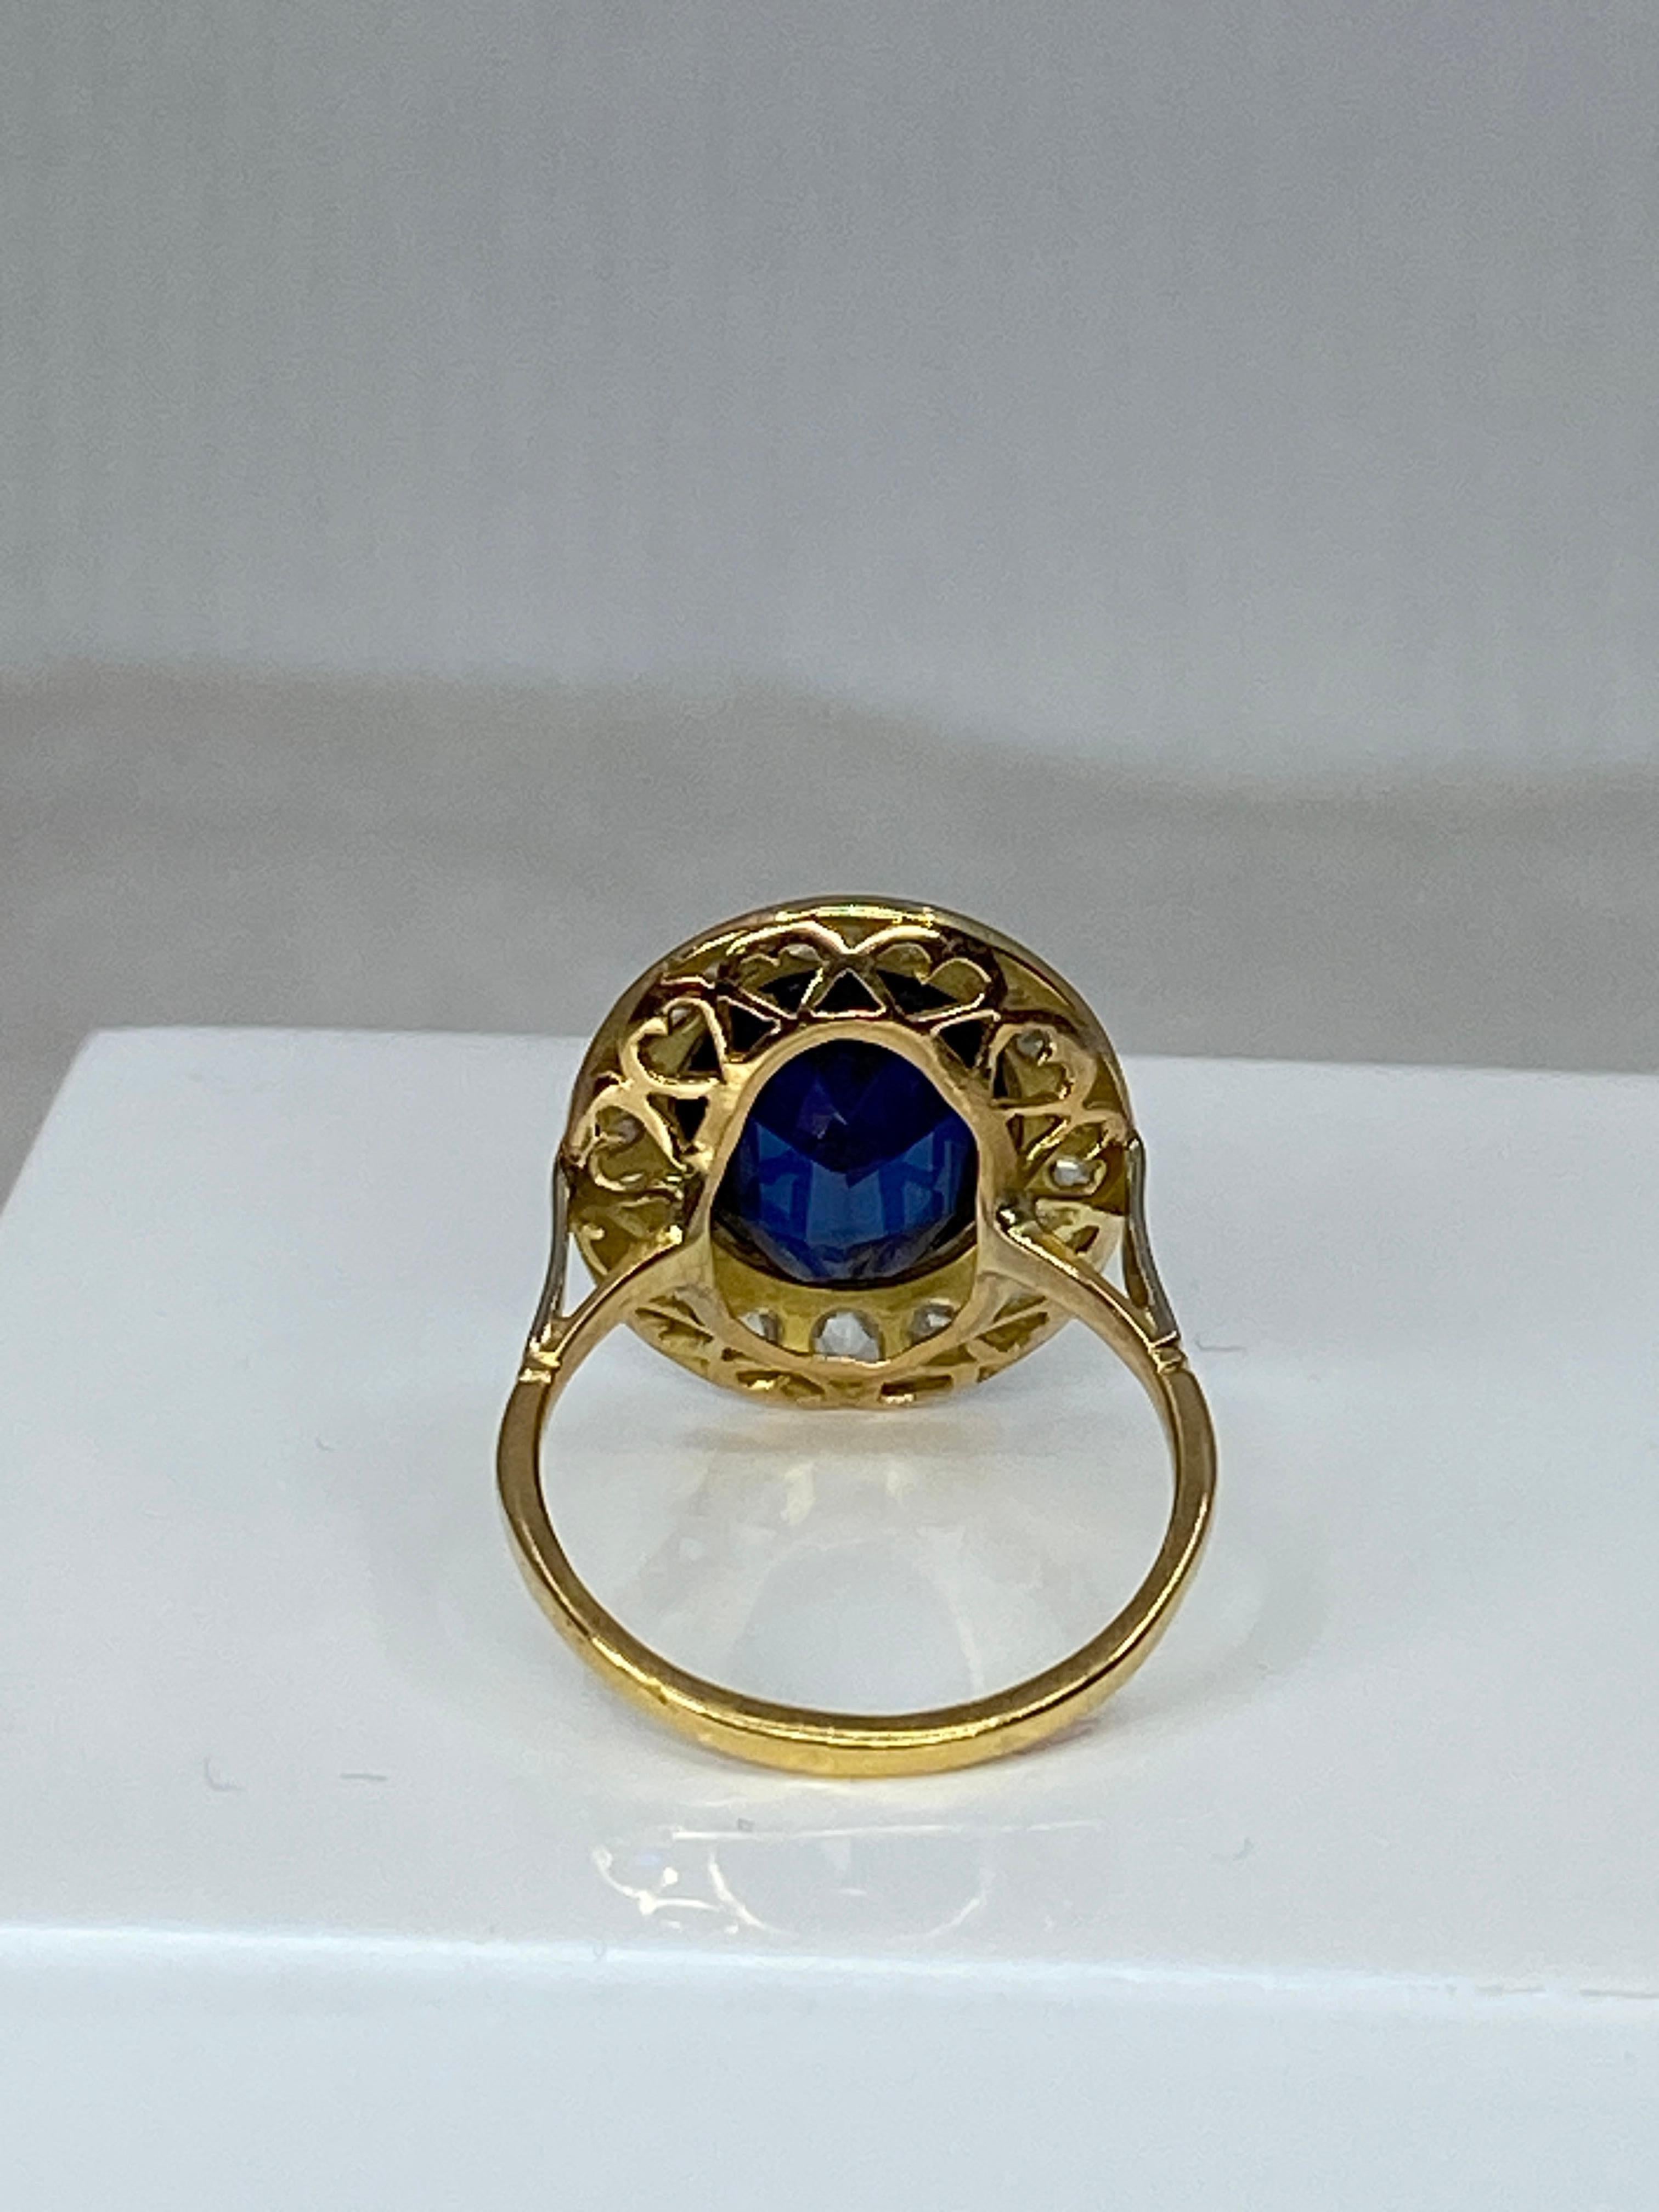 18 Carat Gold Ring Verneuil Sapphire and Rose-Cut Diamonds, 1900 Period 3